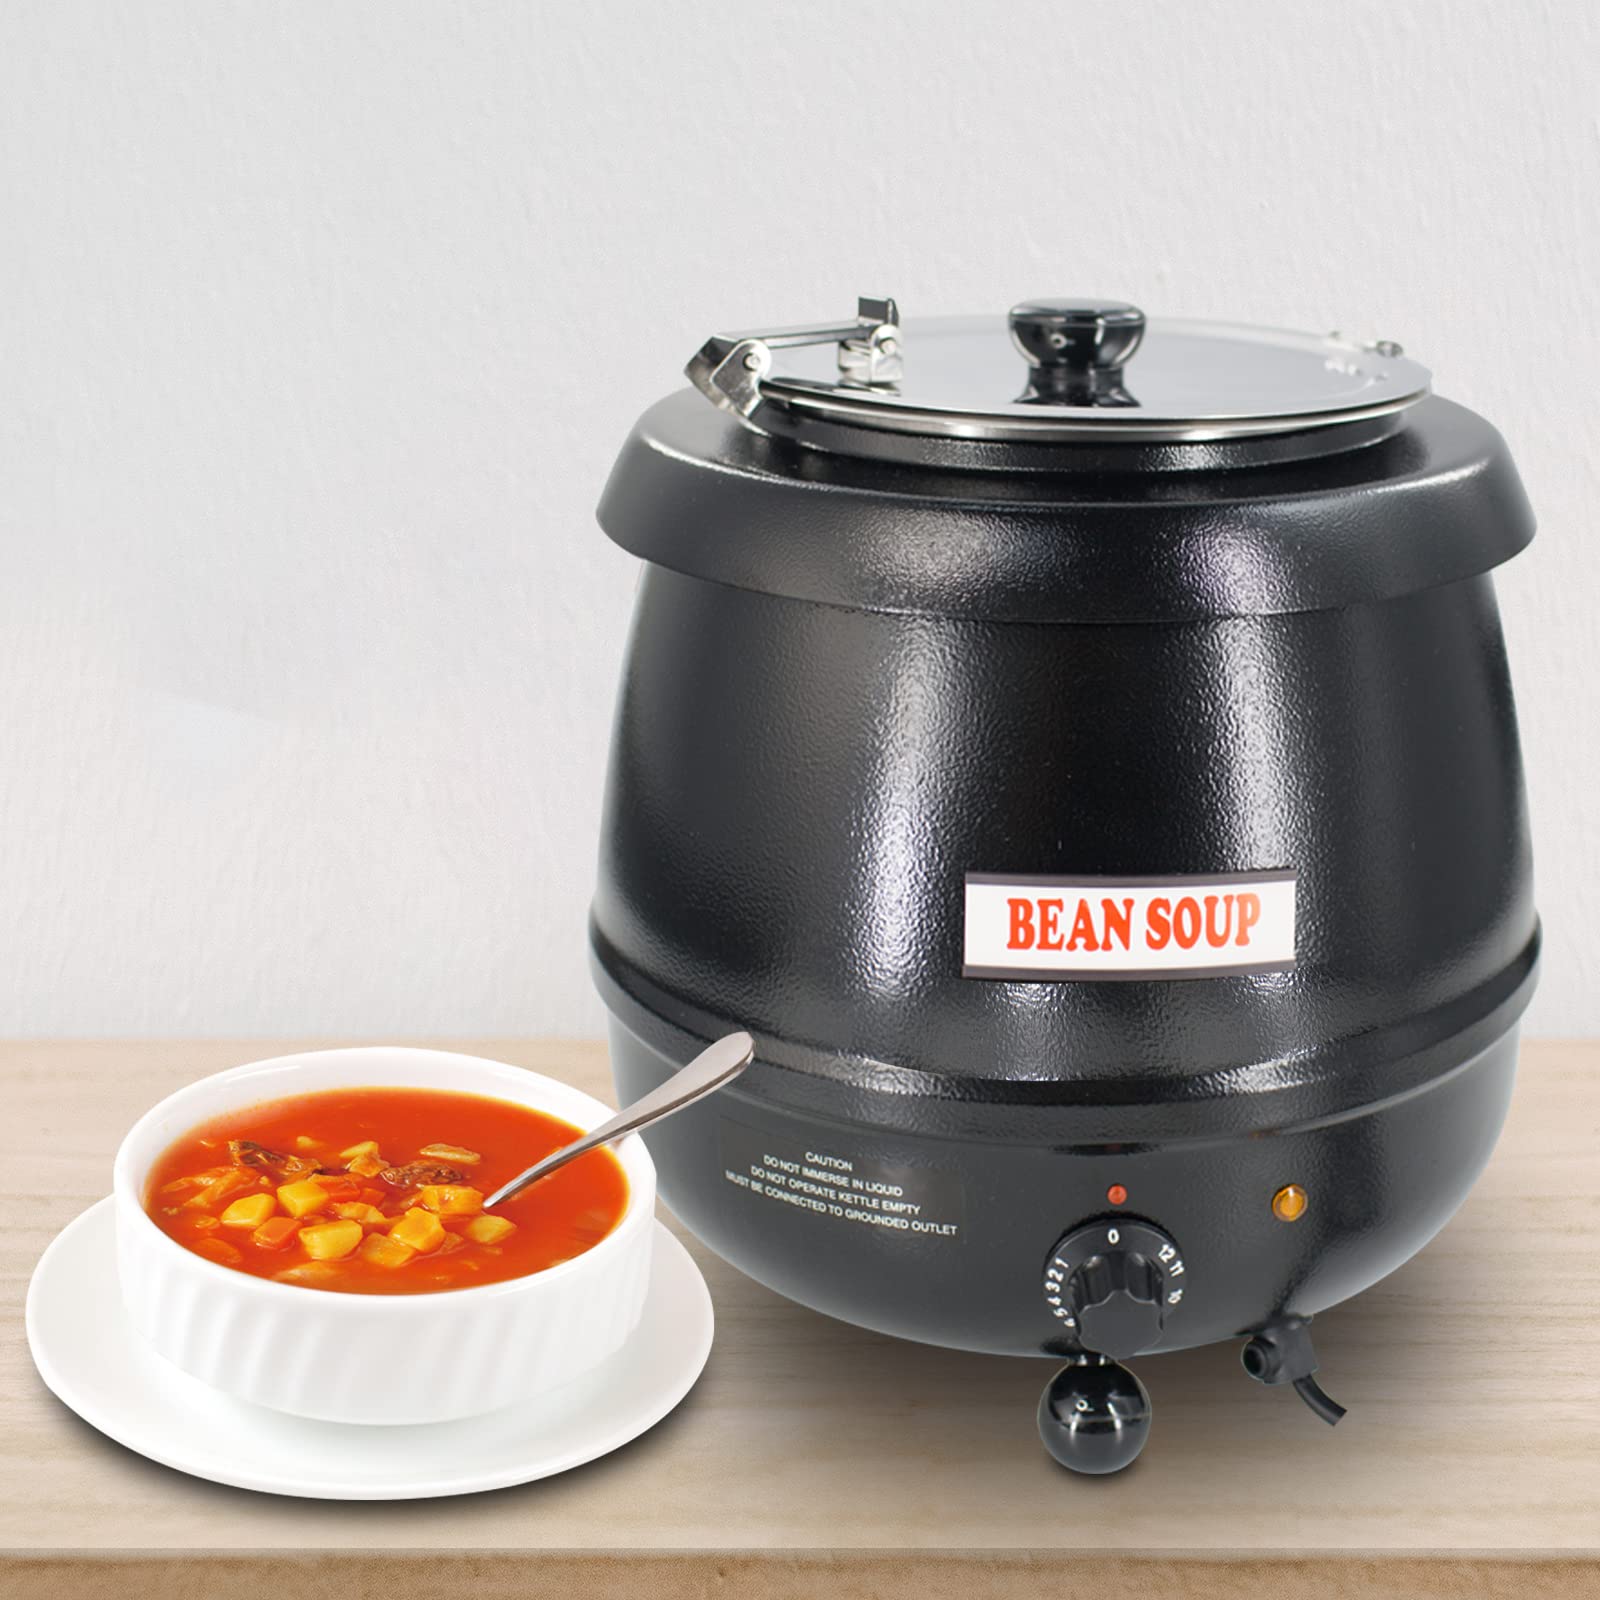 Hakka 11Qt Soup Warmer Commercial Soup Kettle Warmer with Hinged Lid and Detachable Stainless Steel Pot（SB-6000）